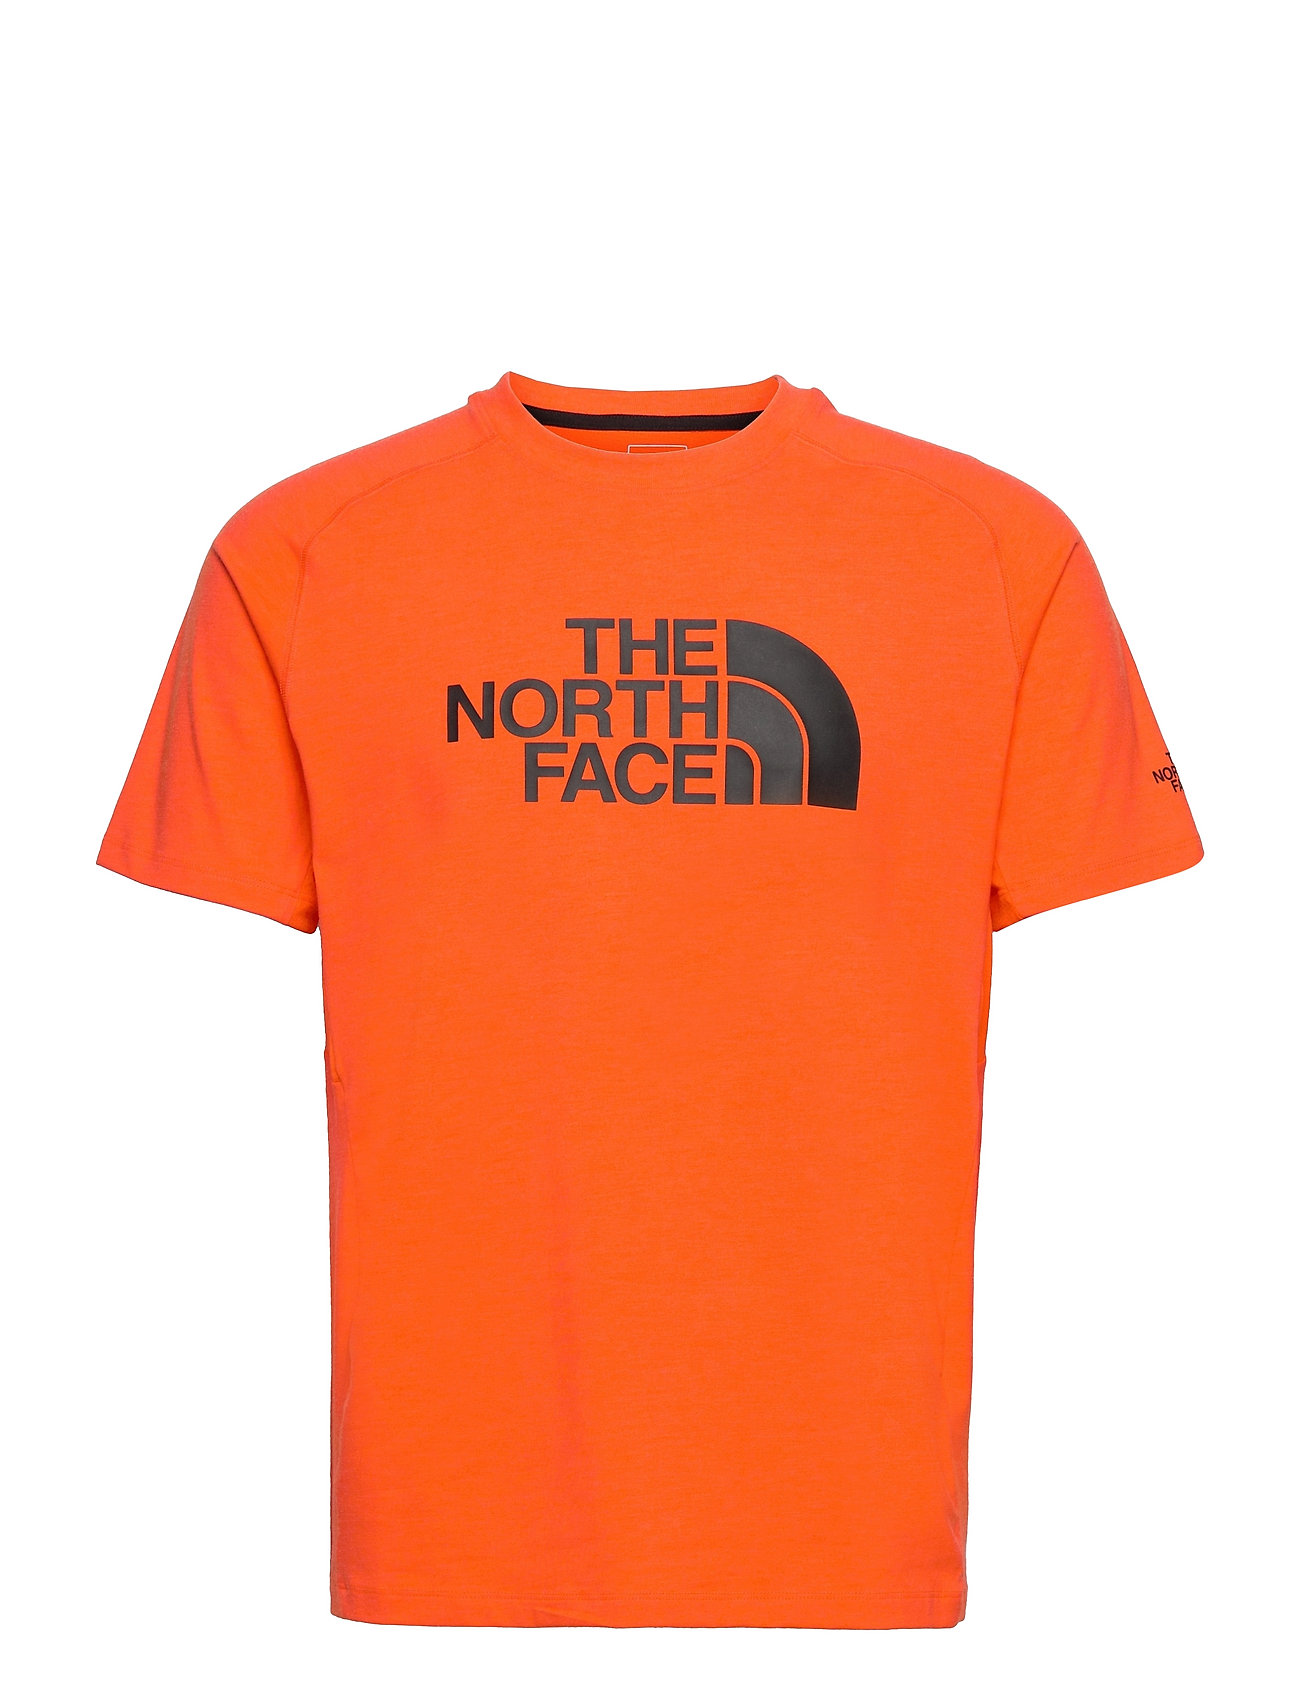 M Wicke Graphi Cr-Eu T-shirts Short-sleeved Oranssi The North Face